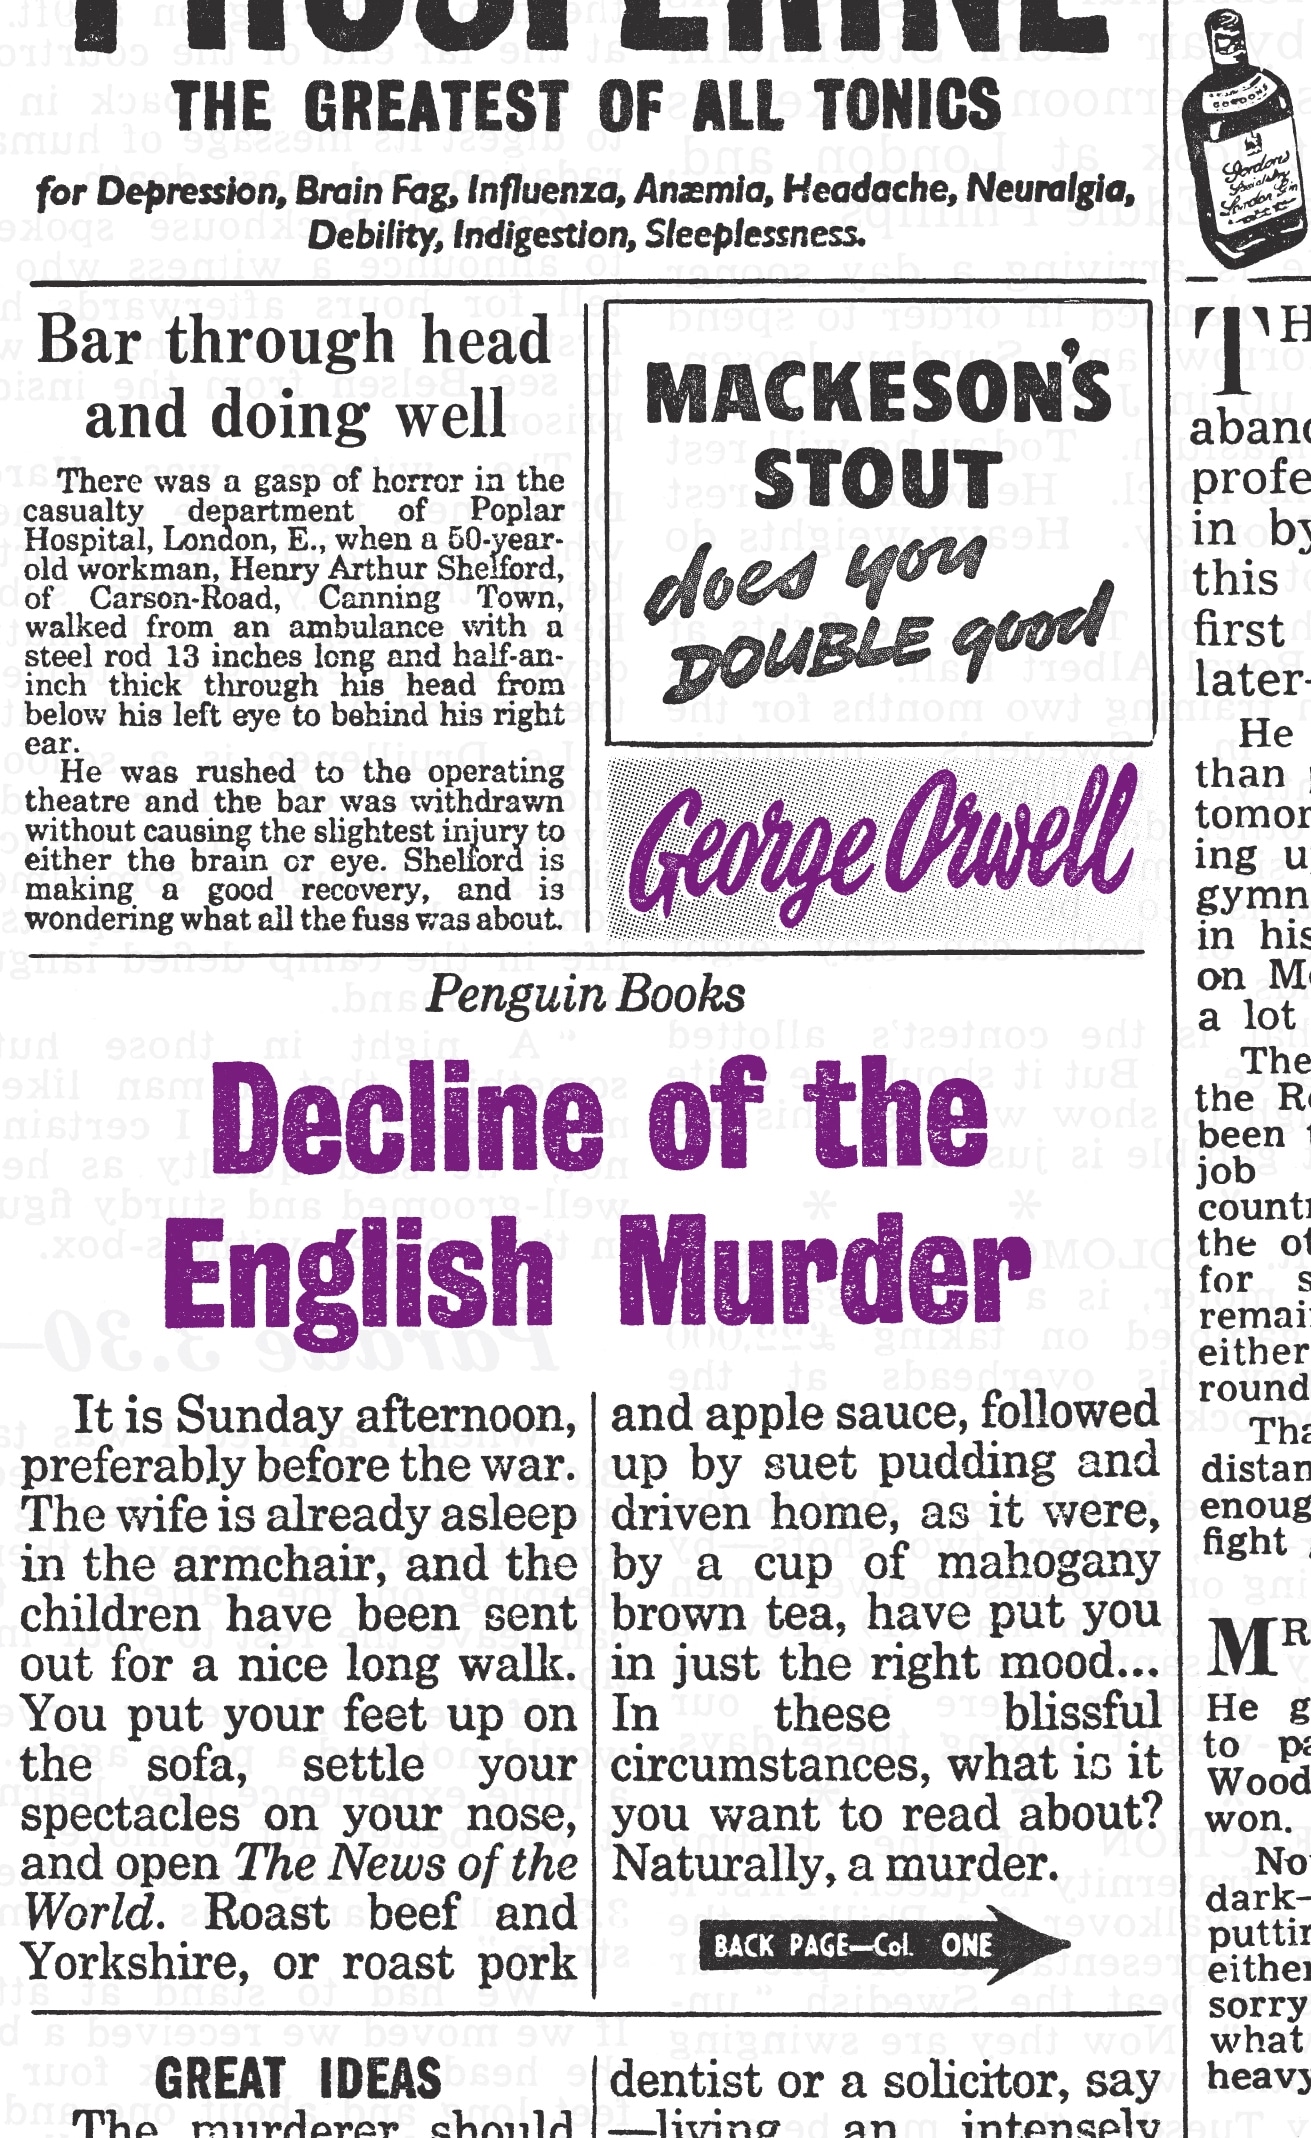 Book “Decline of the English Murder” by George Orwell — August 27, 2009